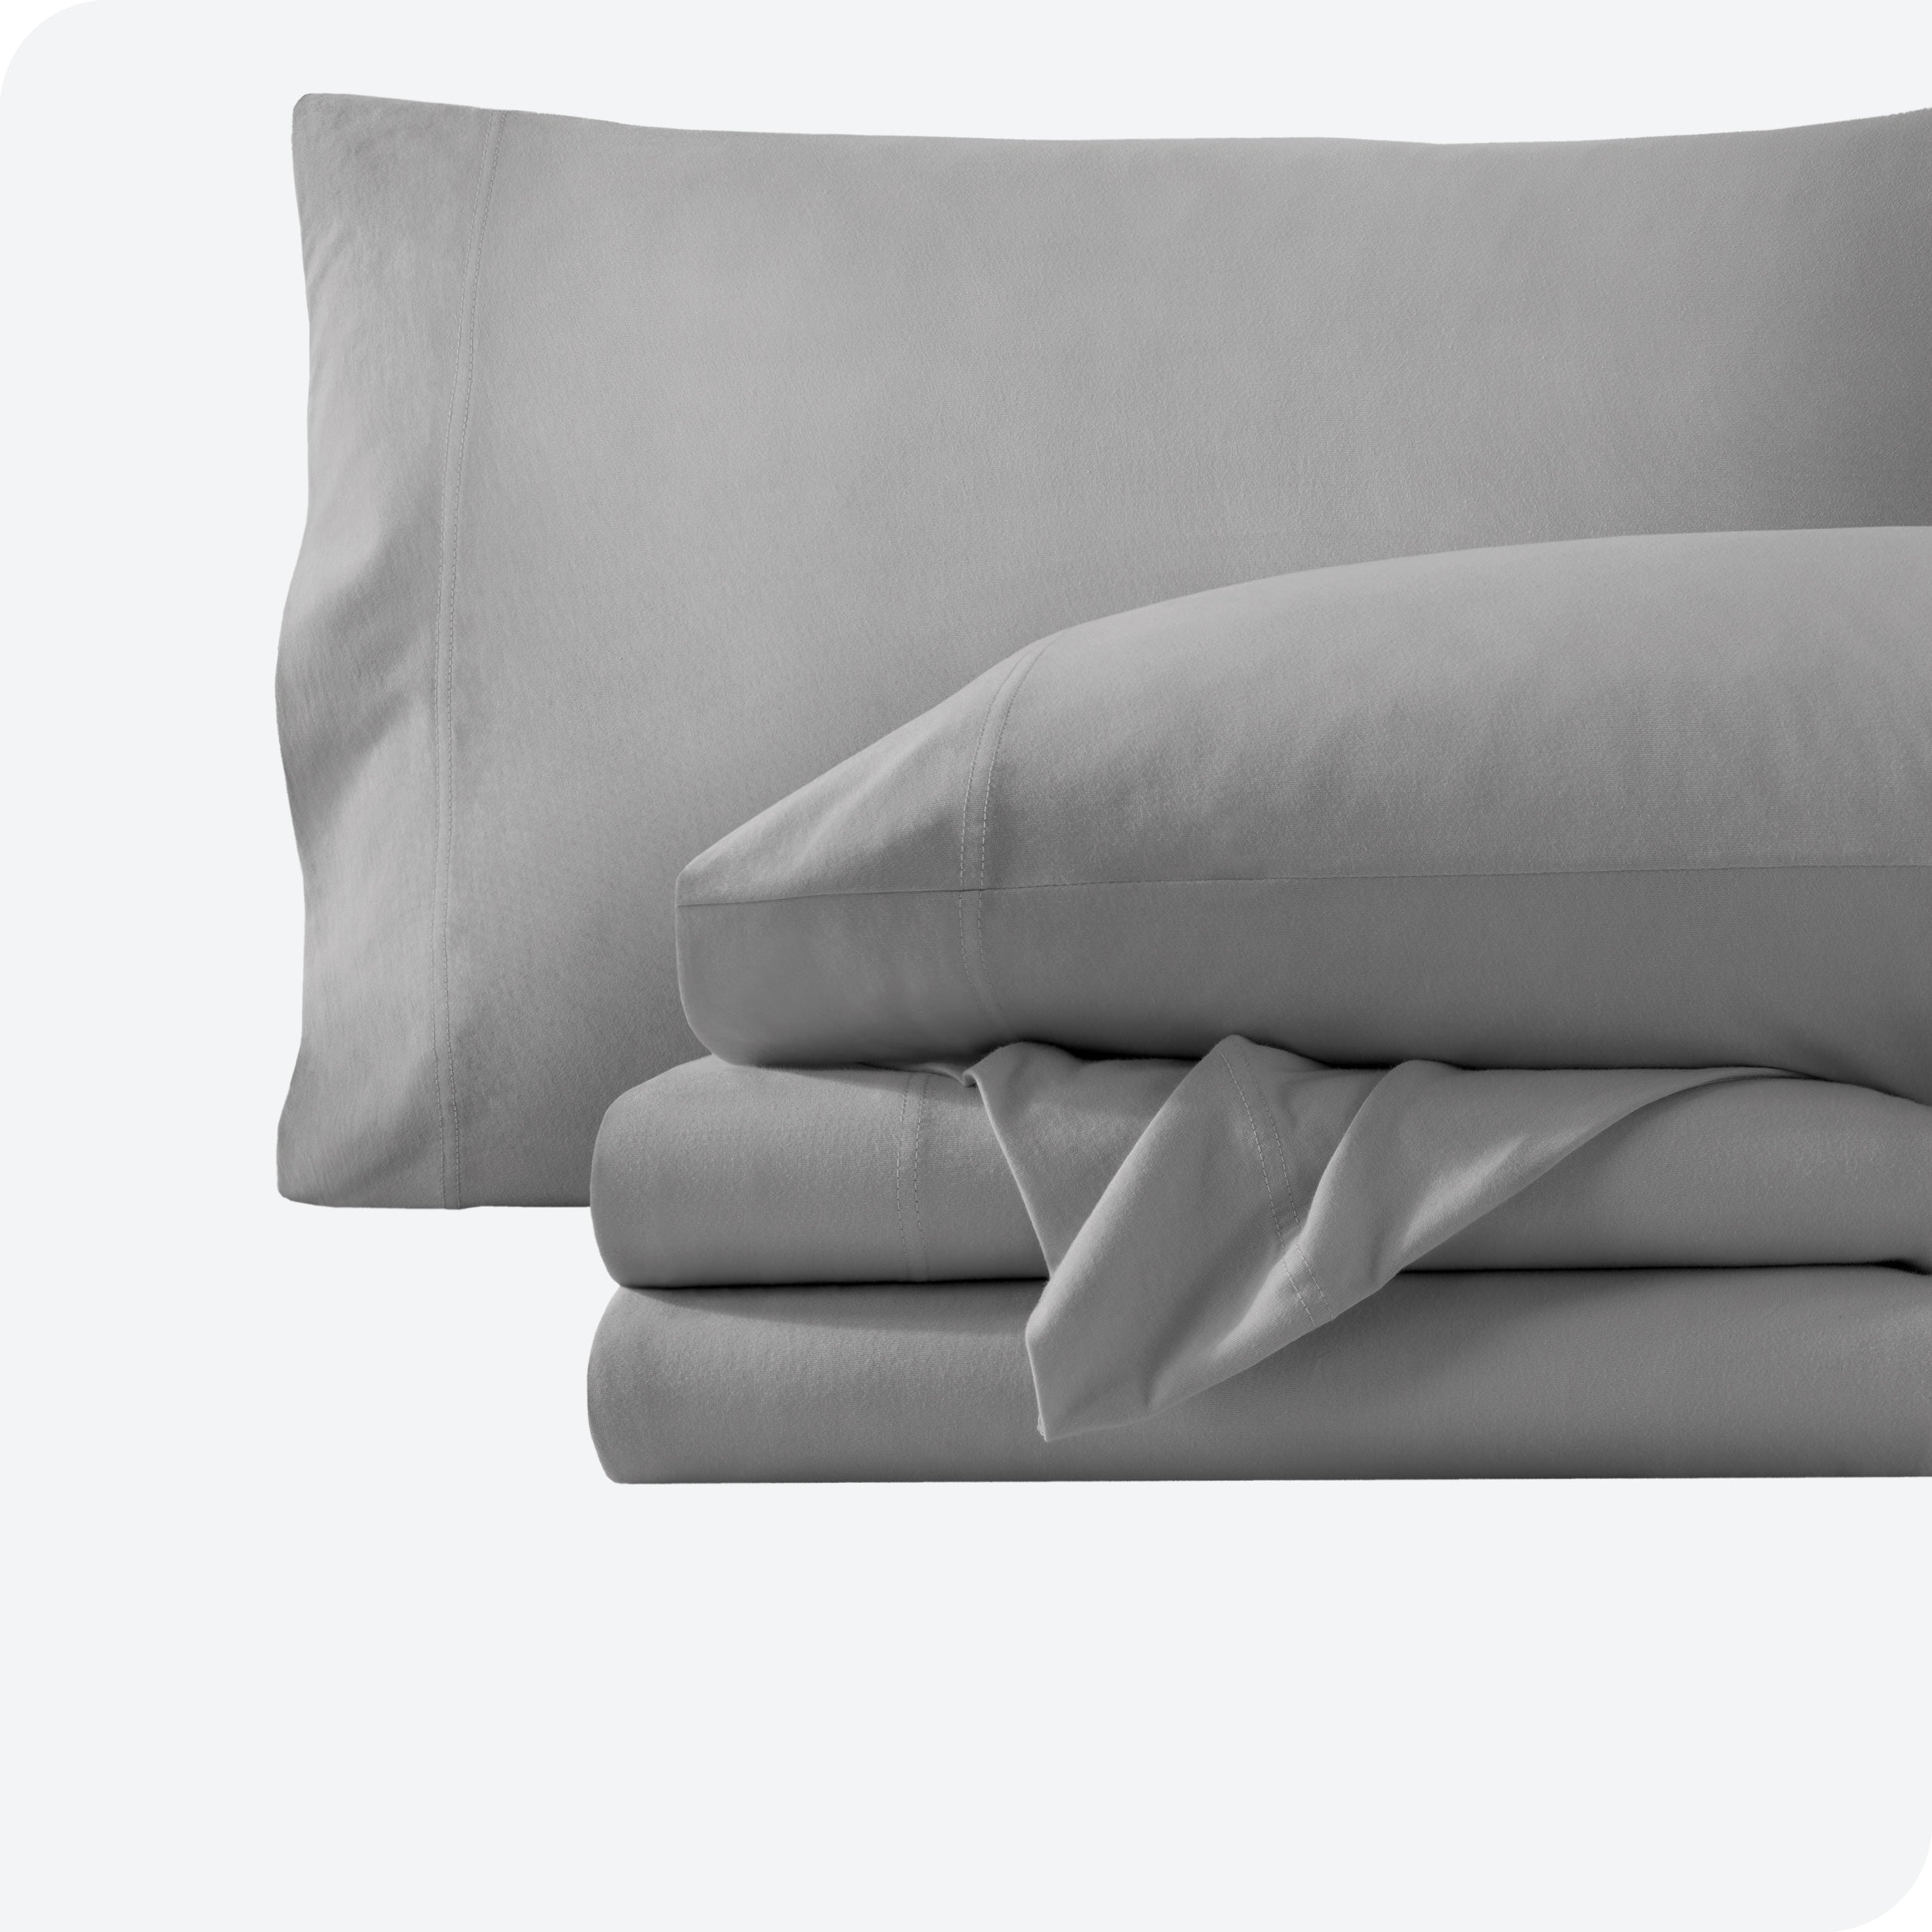 A light grey sheet set folded and stacked